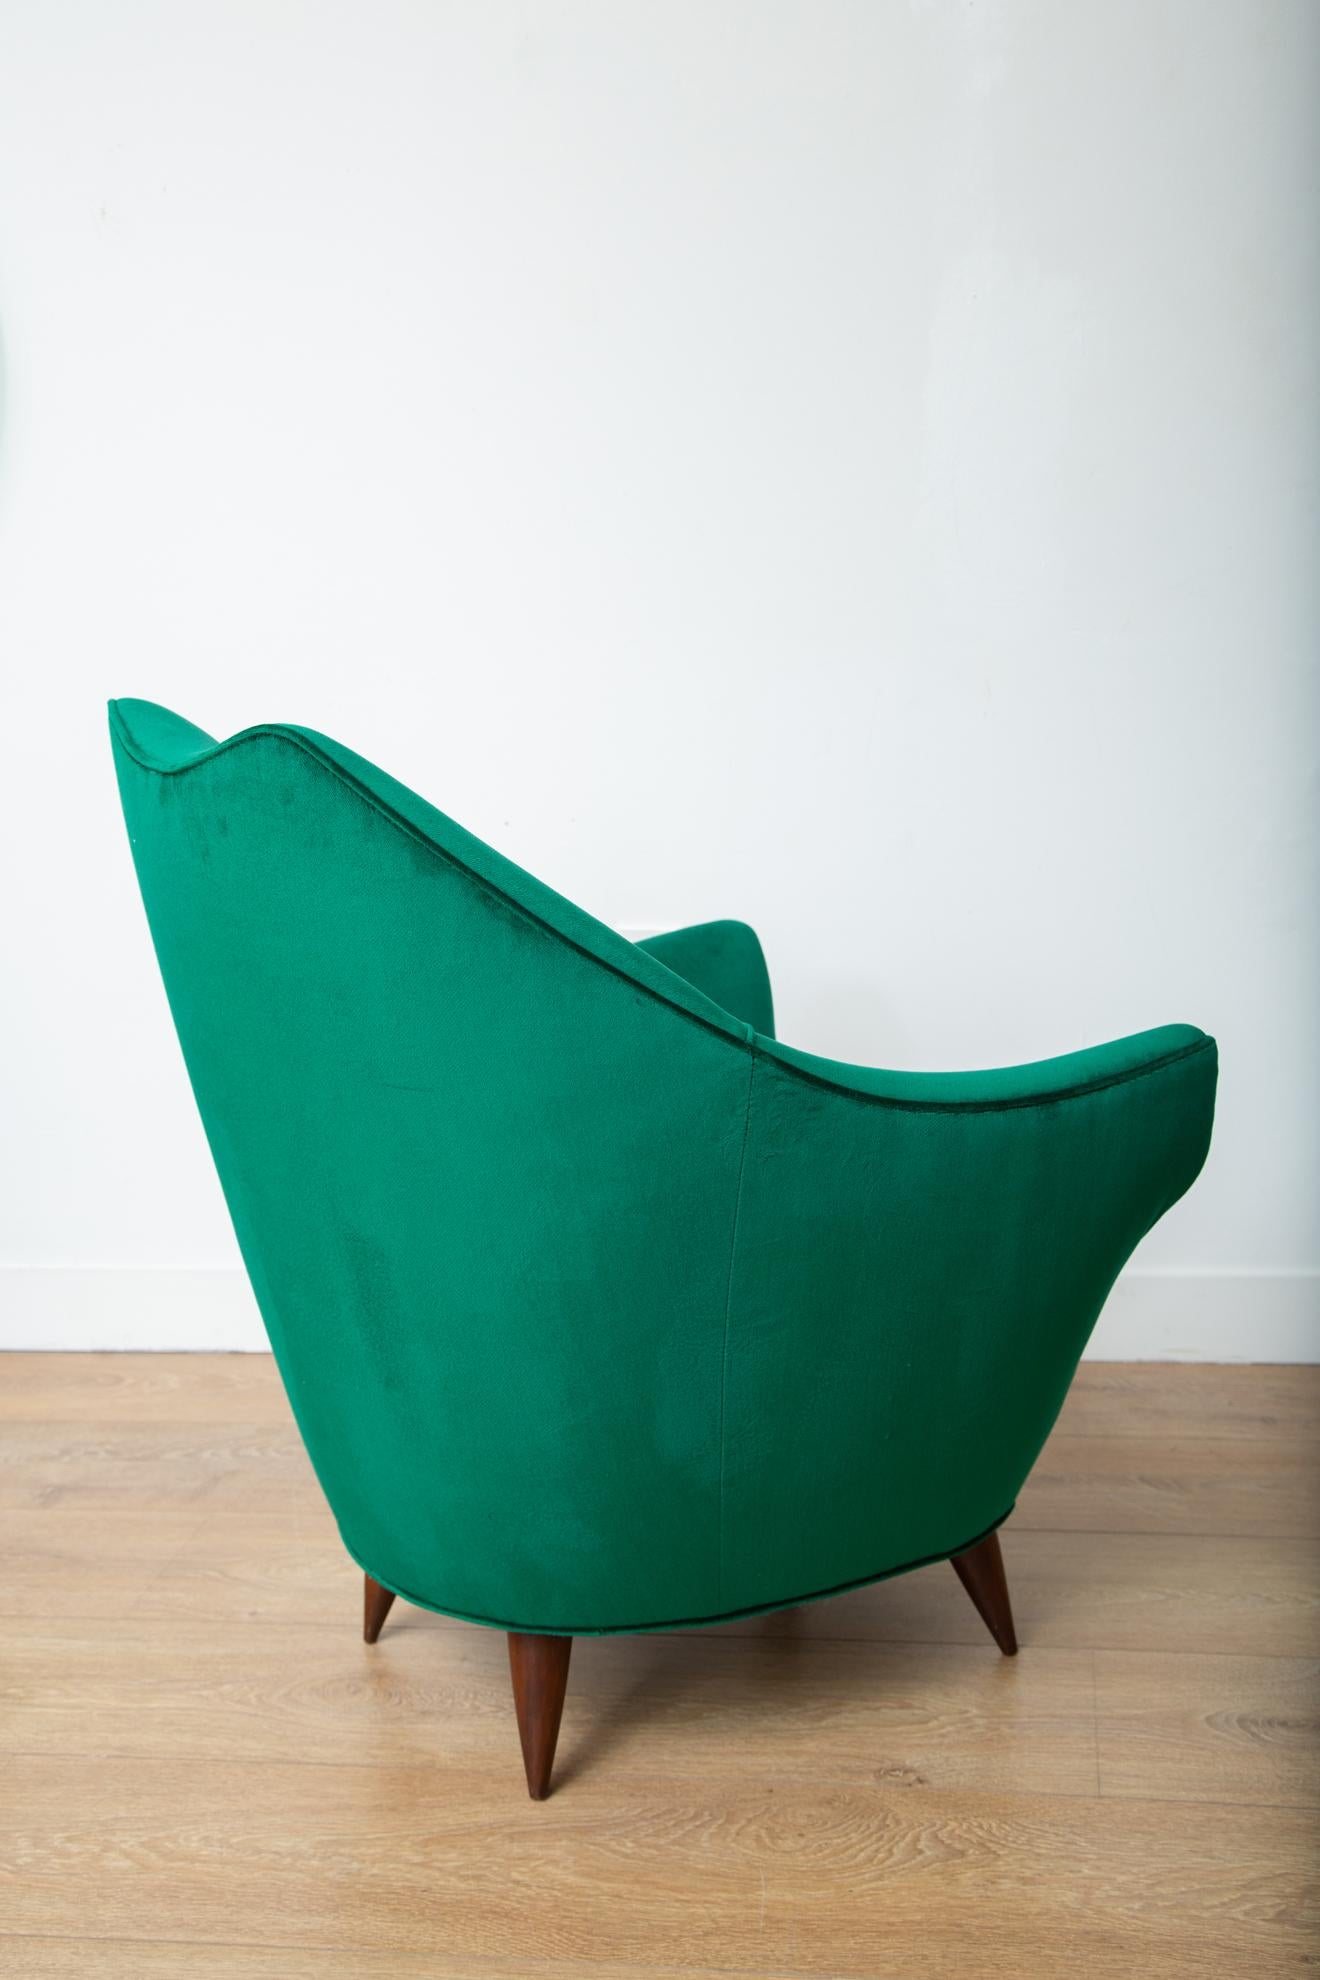 Pair of Mid-Century Modern Italian Lounge Chairs in Emerald Green Velvet For Sale 5